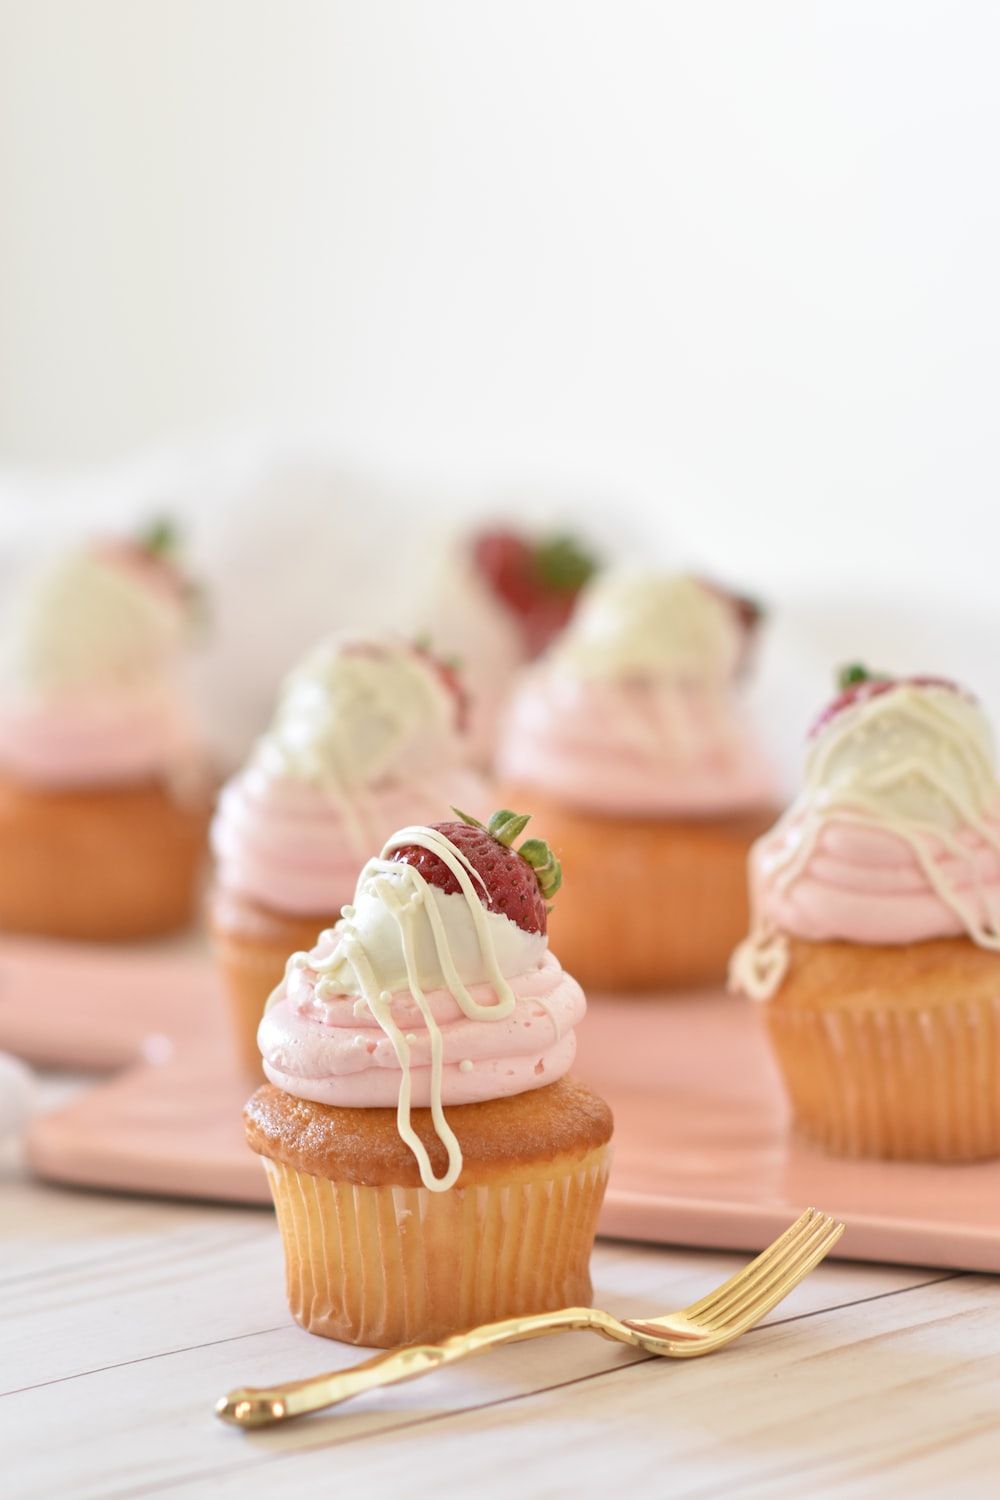 Strawberry cupcakes with white chocolate drizzle and a fresh strawberry on top. Perfect for Valentine's Day or any special occasion. - Bakery, cake